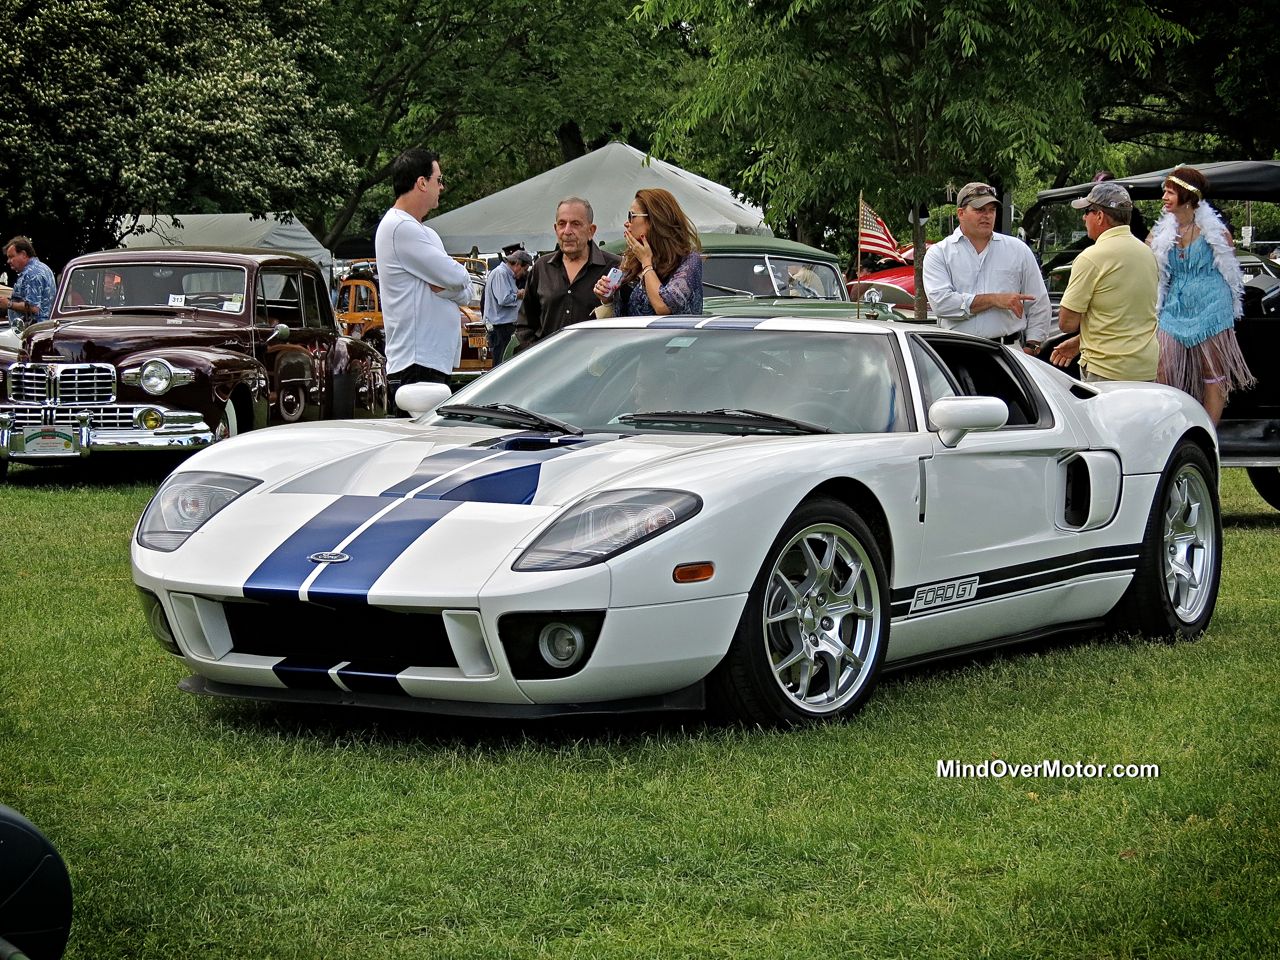 Ford GT supercar at the Greenwich Concours